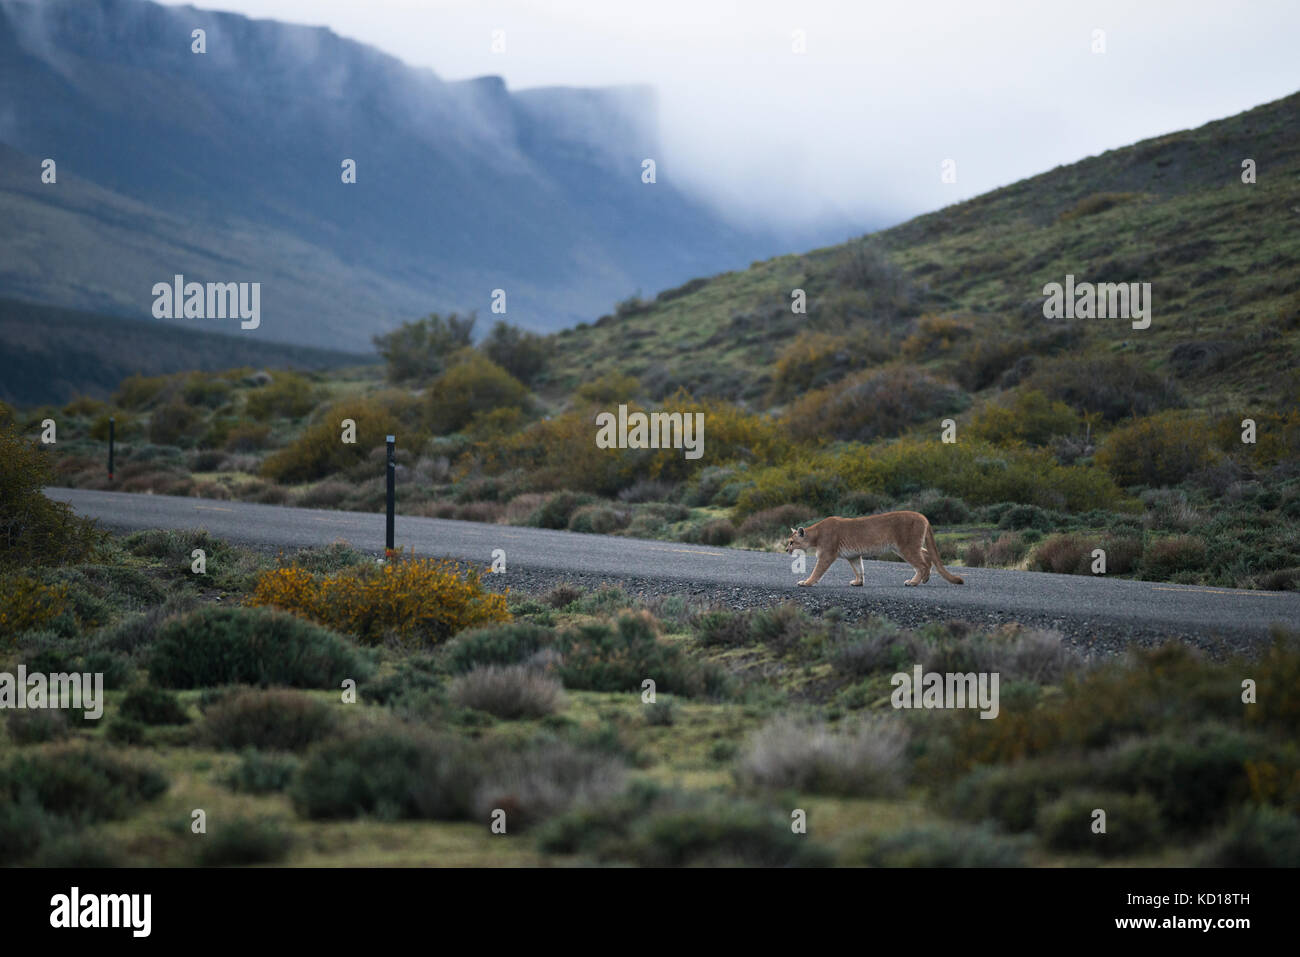 Puma crossing a paved road near Torres del Paine National Park, Chile Stock Photo